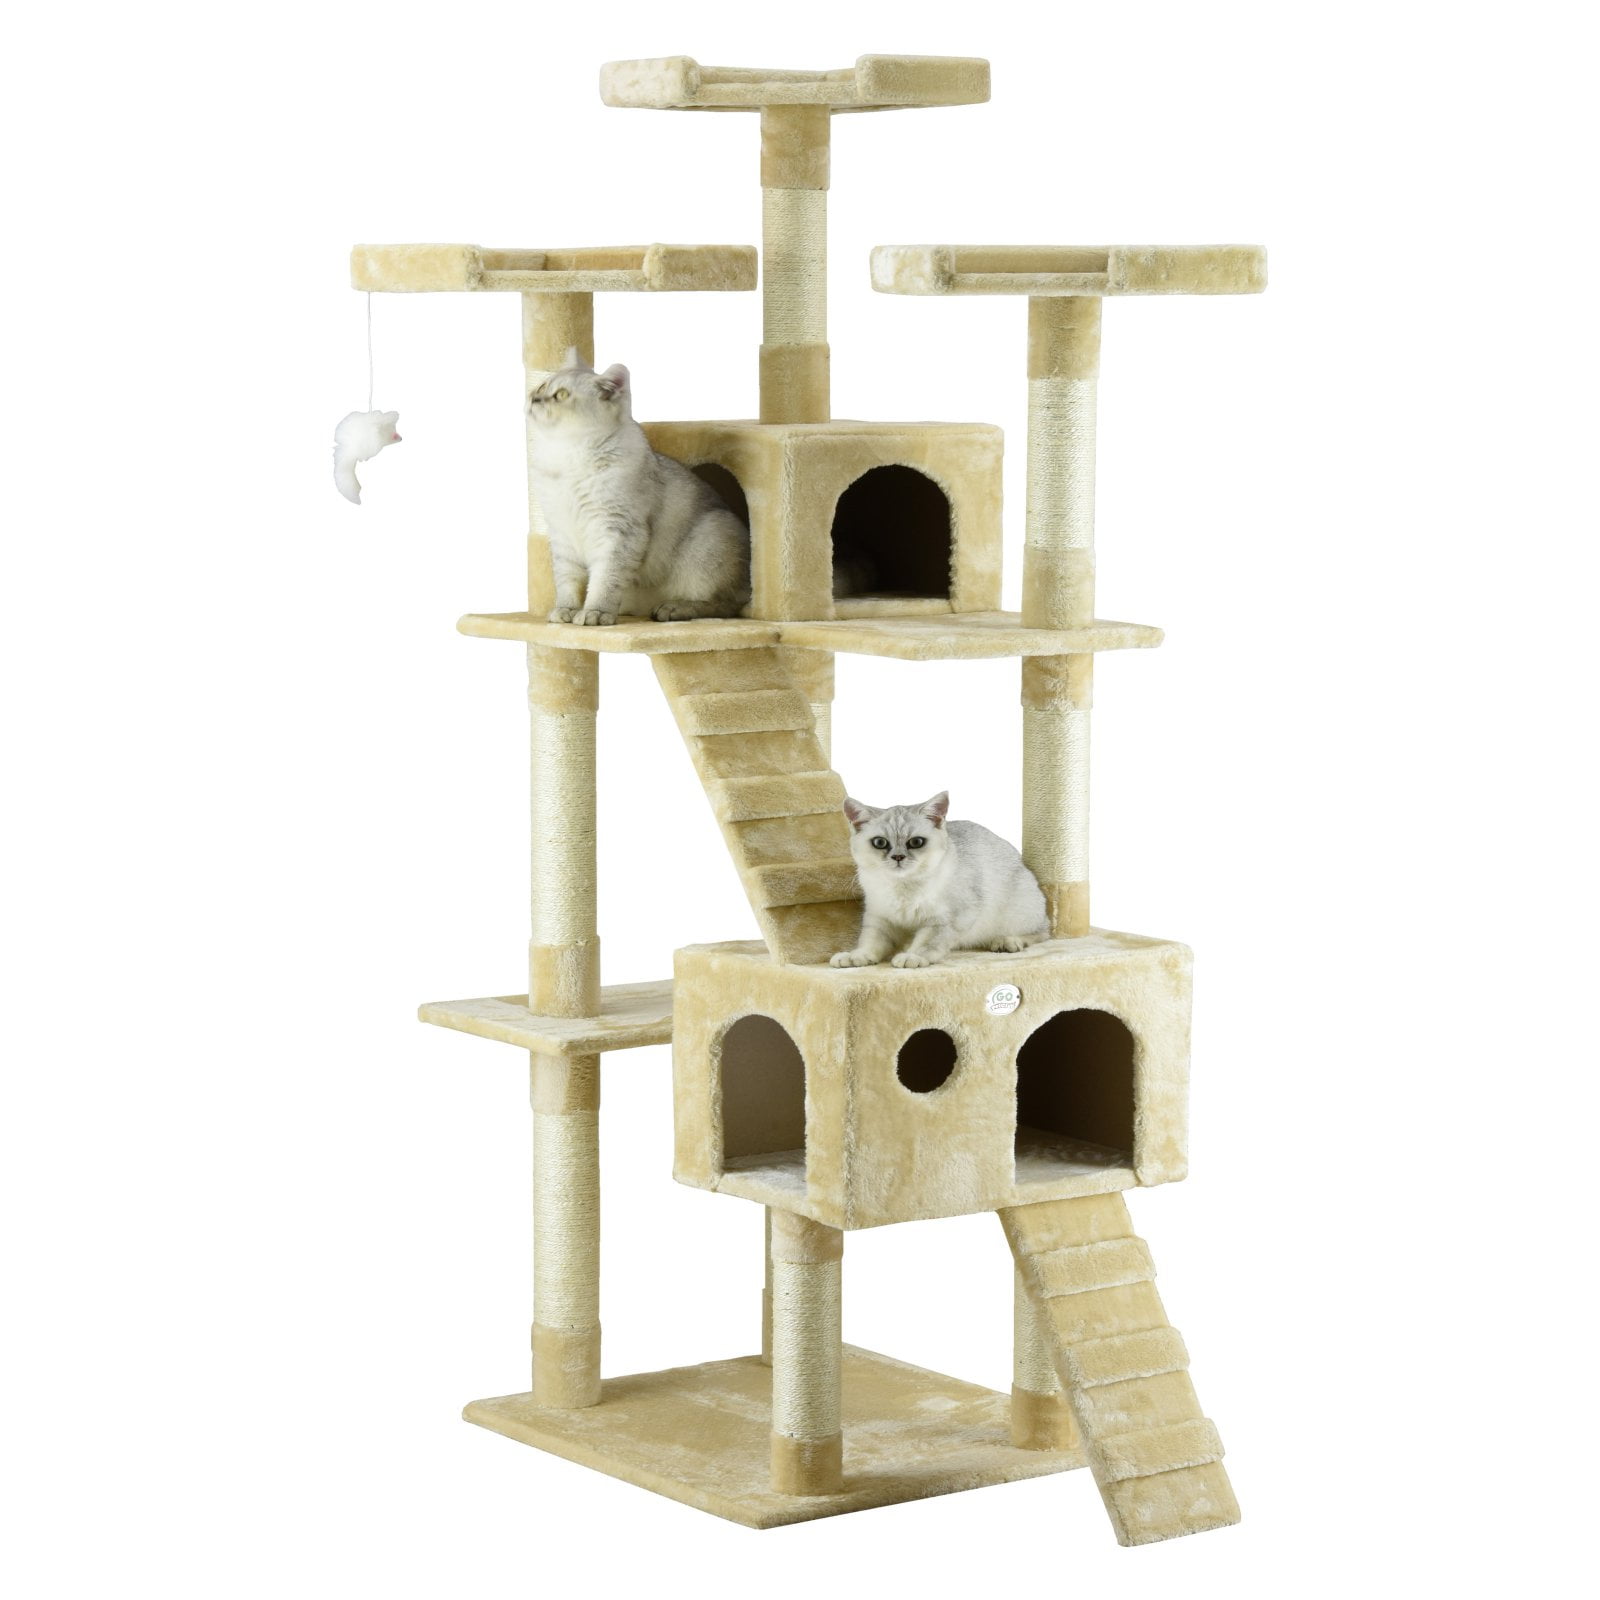 72" Cat Tree Play House Tower Condo Furniture Scratch Post Perch 